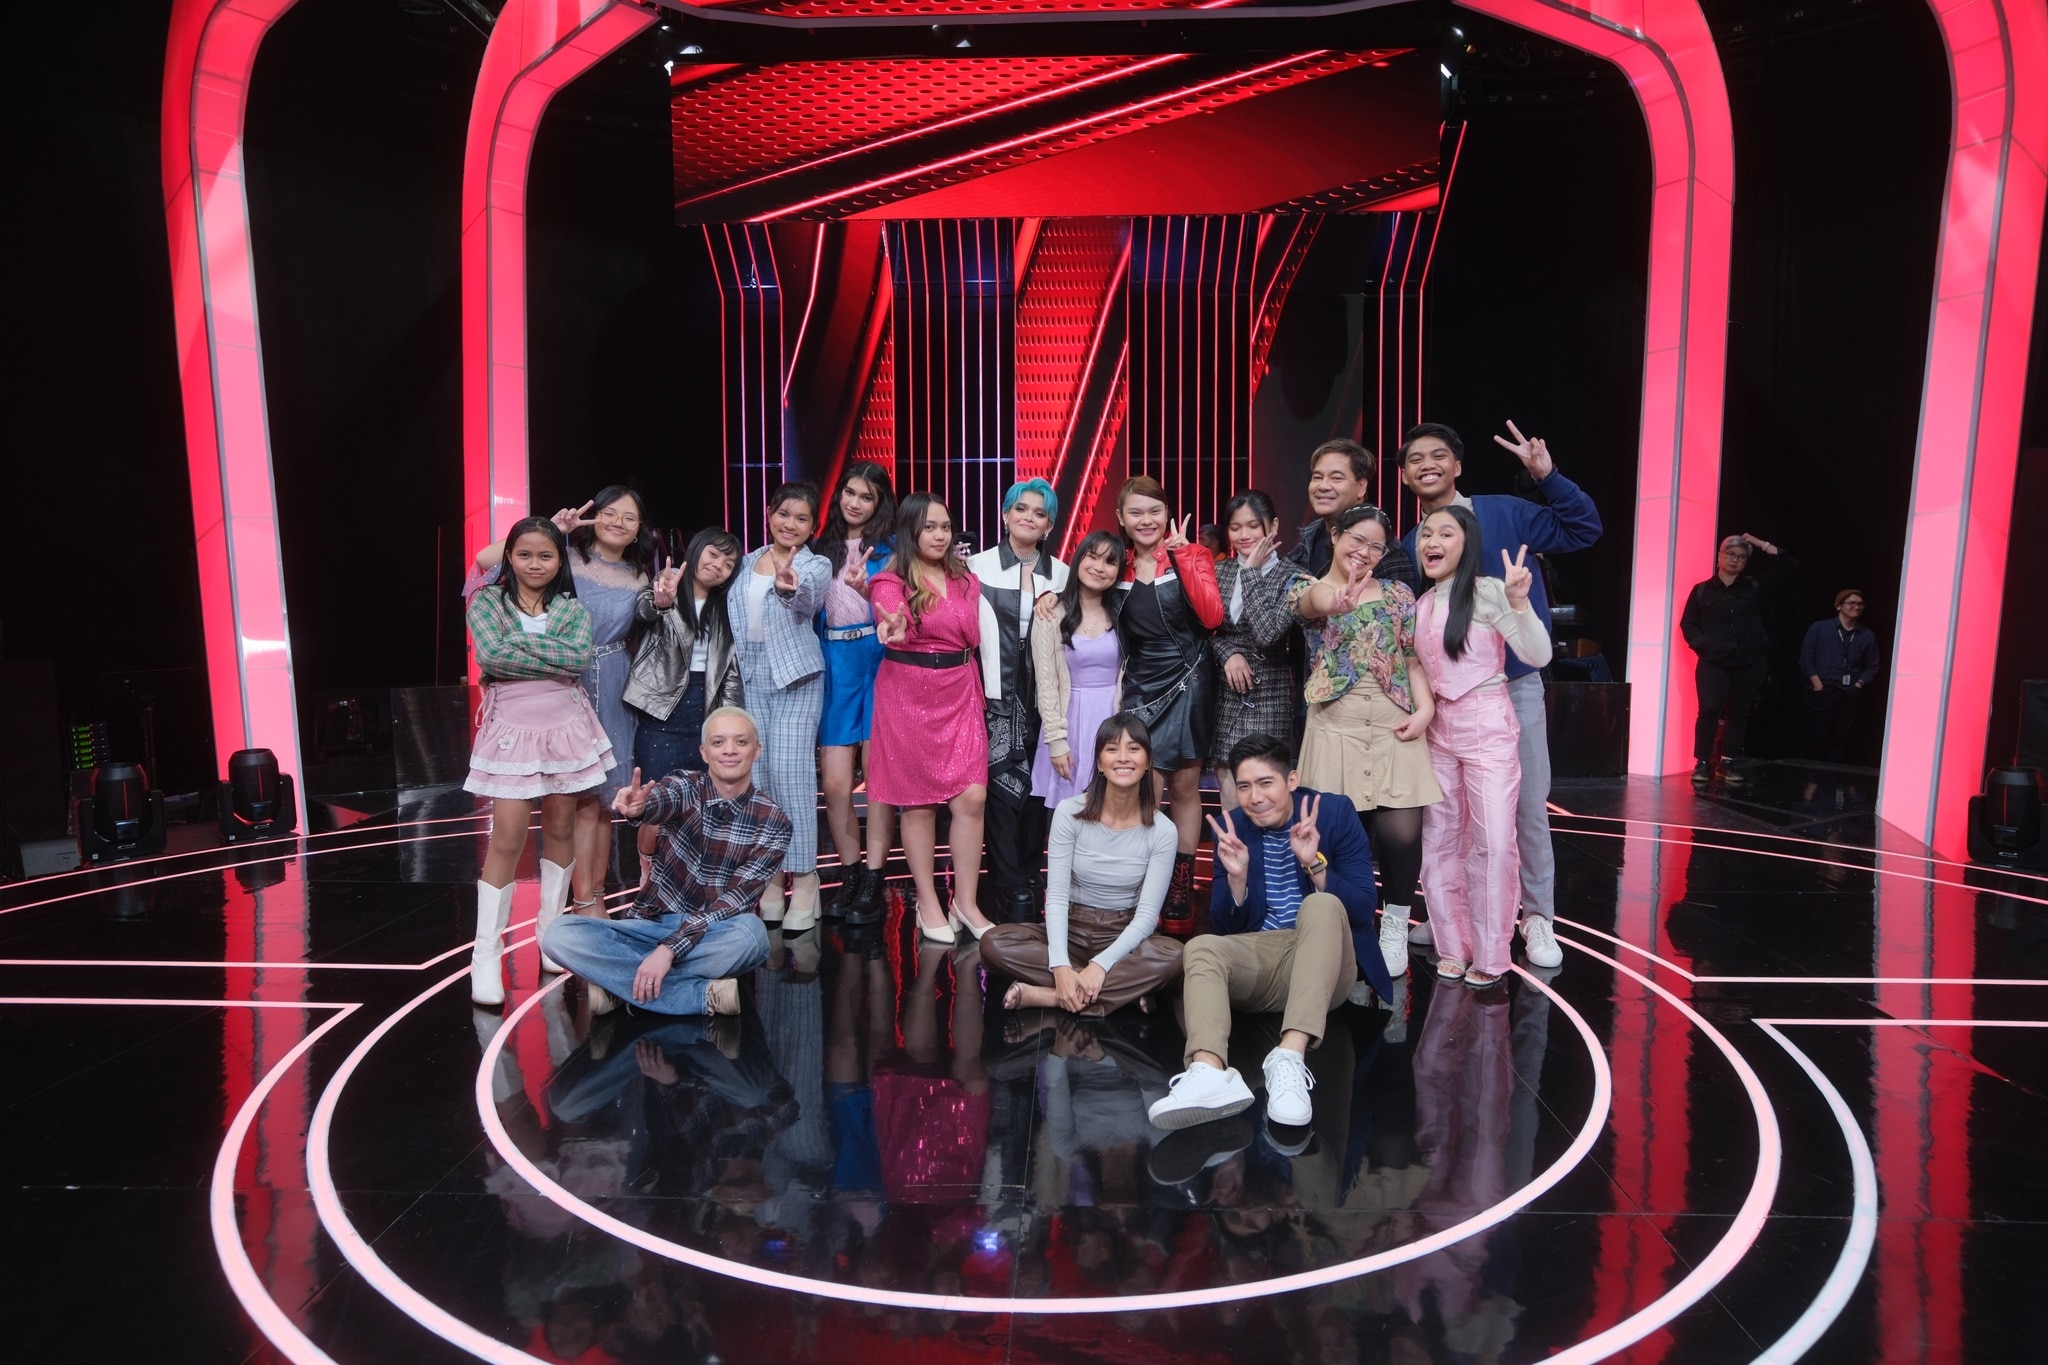 Top 12 teen artists advance to the semifinals, go head-to-head in the live performance rounds of 'The Voice Teens'